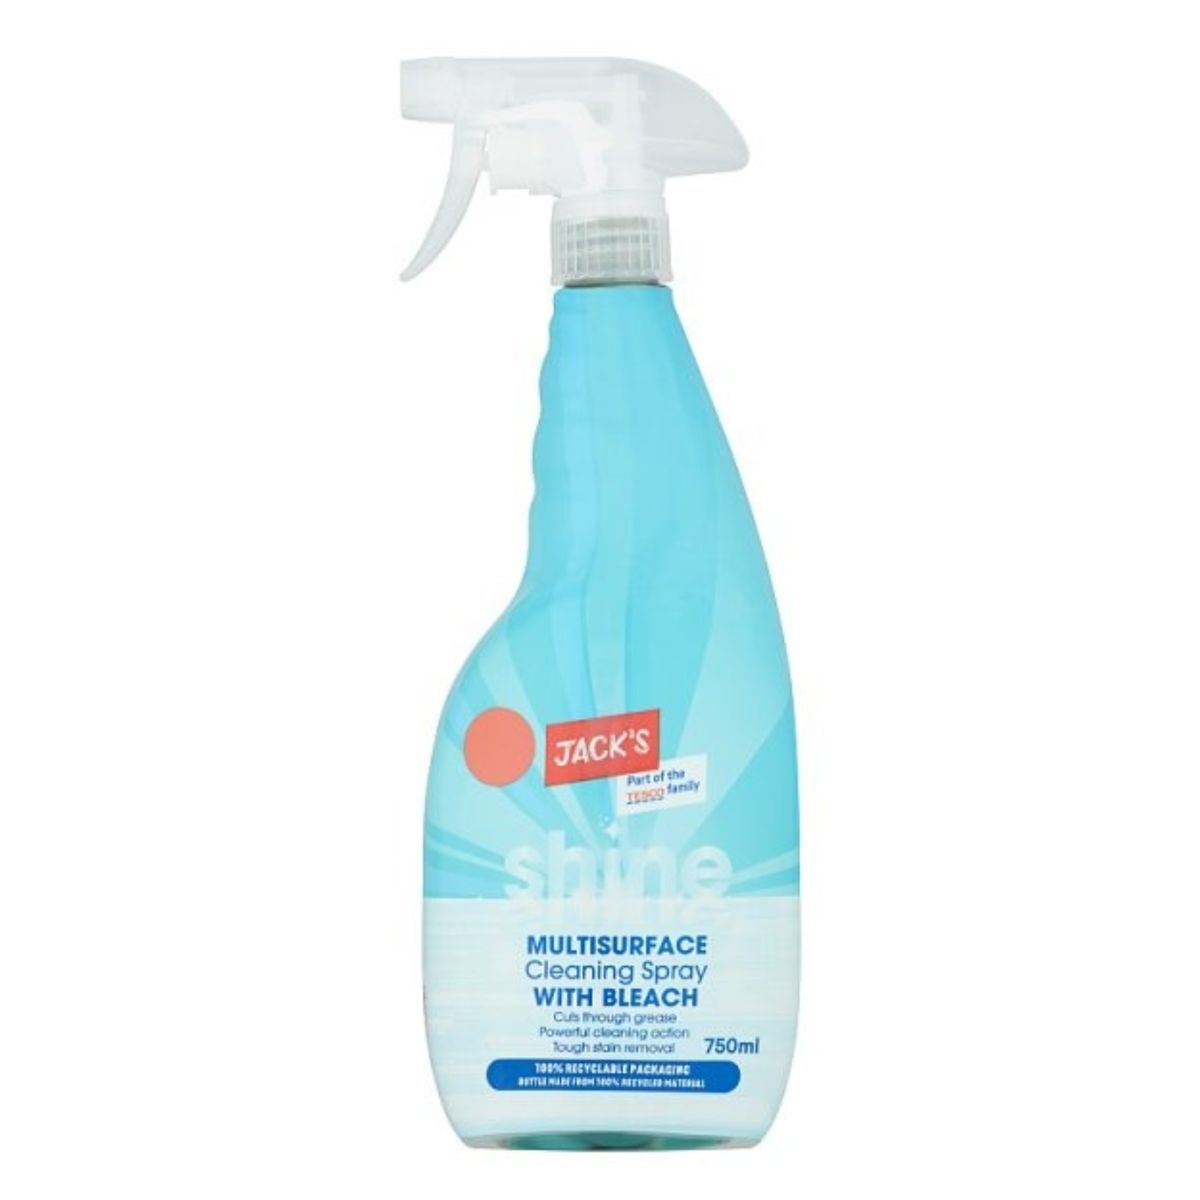 A blue spray bottle containing Jacks - Shine Multisurface Cleaning Spray with Bleach - 750ml, with a white label.